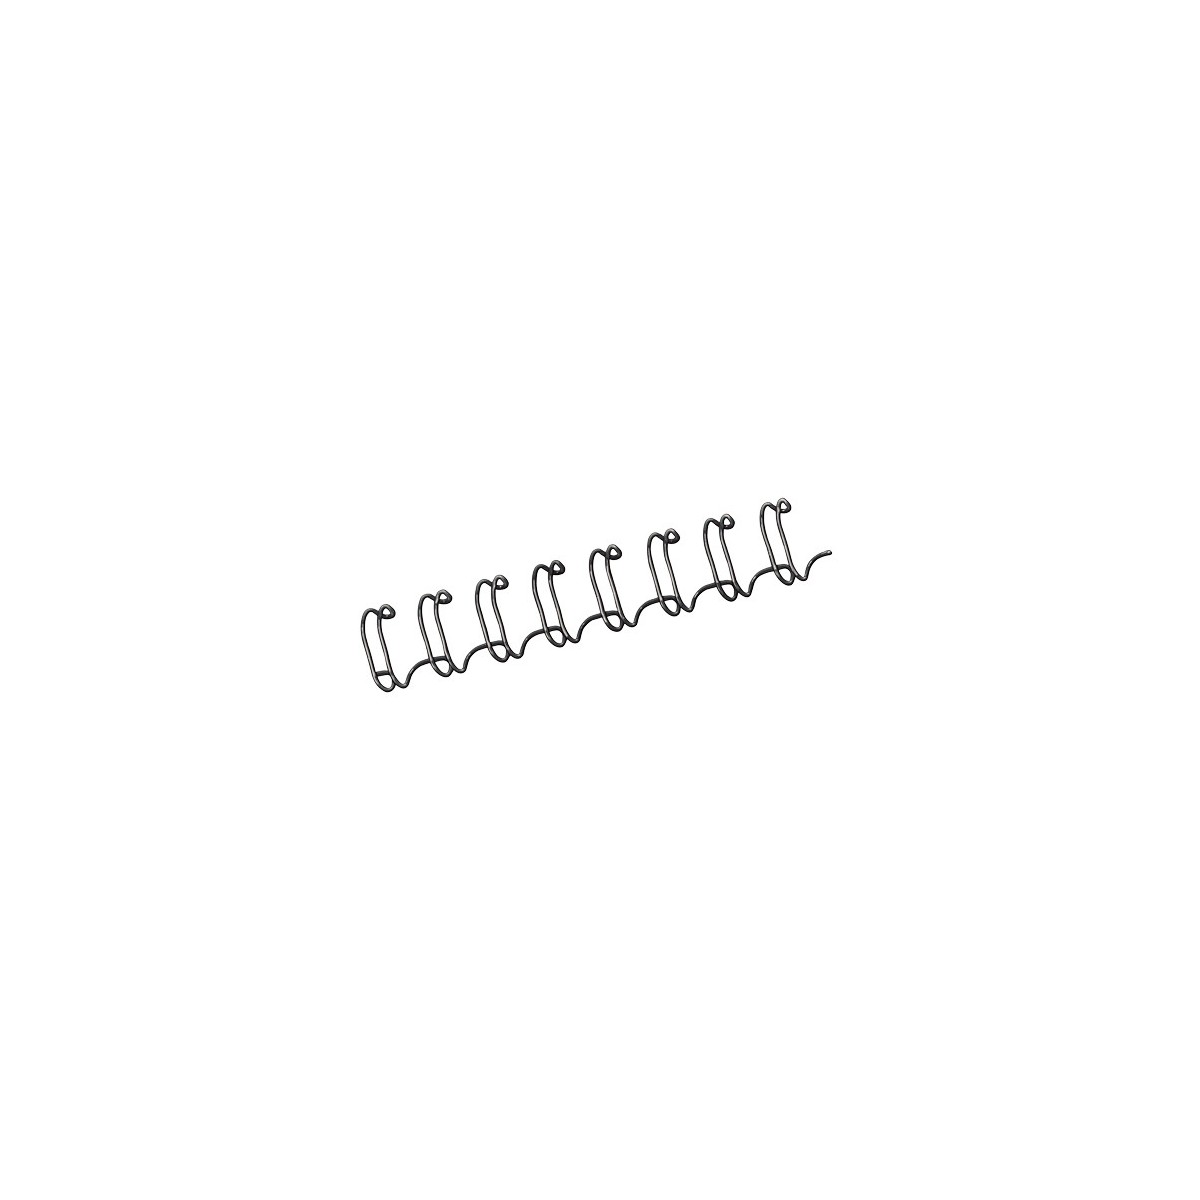 PACK 100 WIRES 10 MM NEGRO FELLOWES 53265